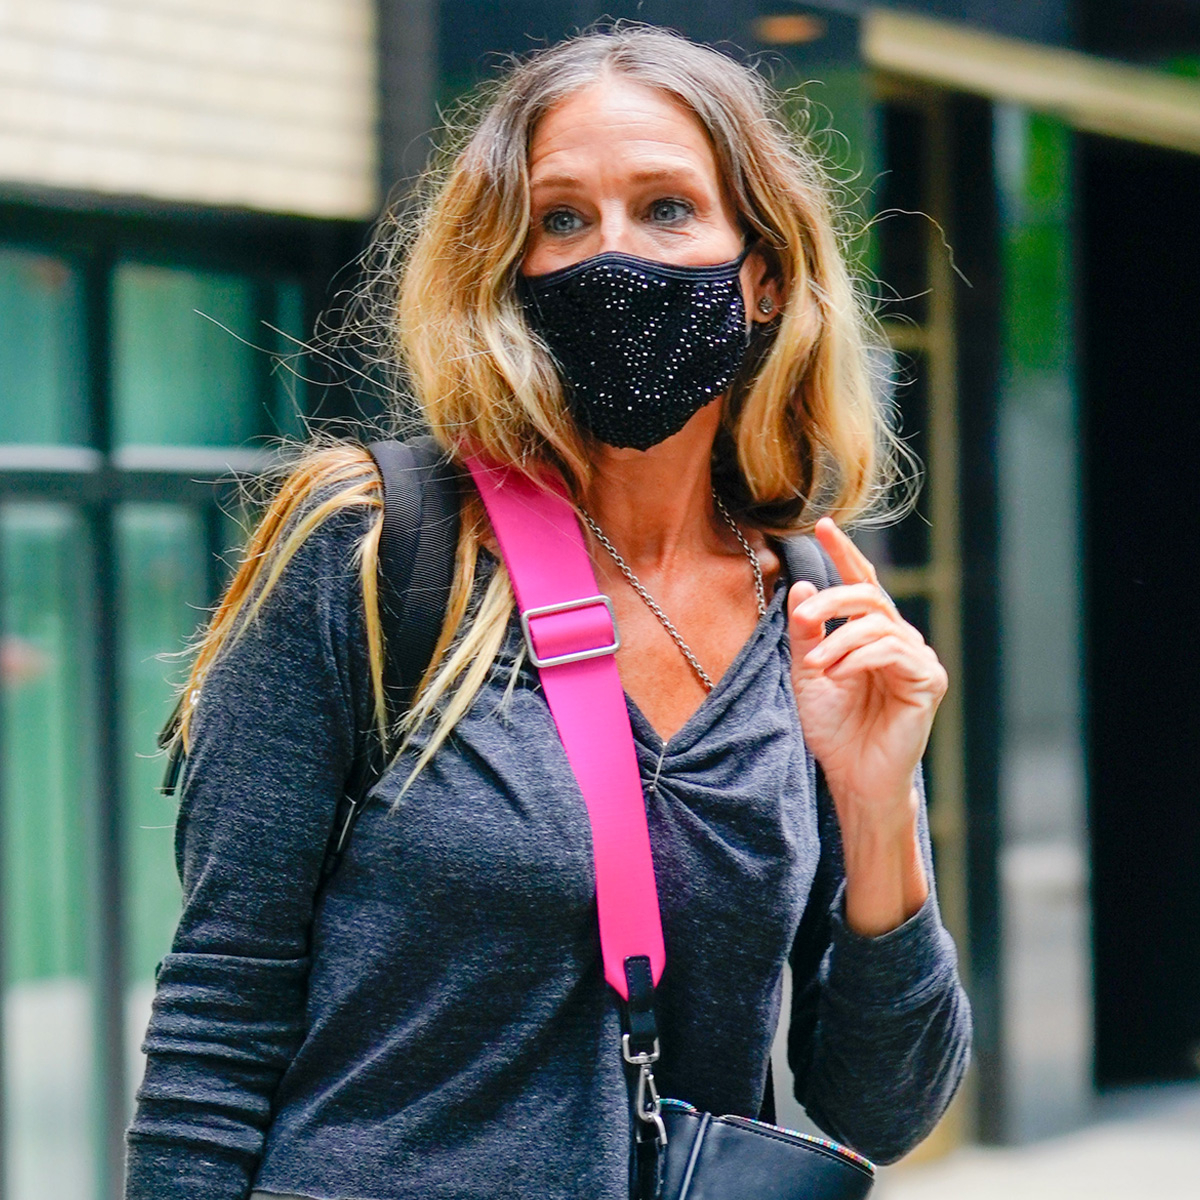 Sarah Jessica Parker Works in Her NYC Shoe Store During Pandemic